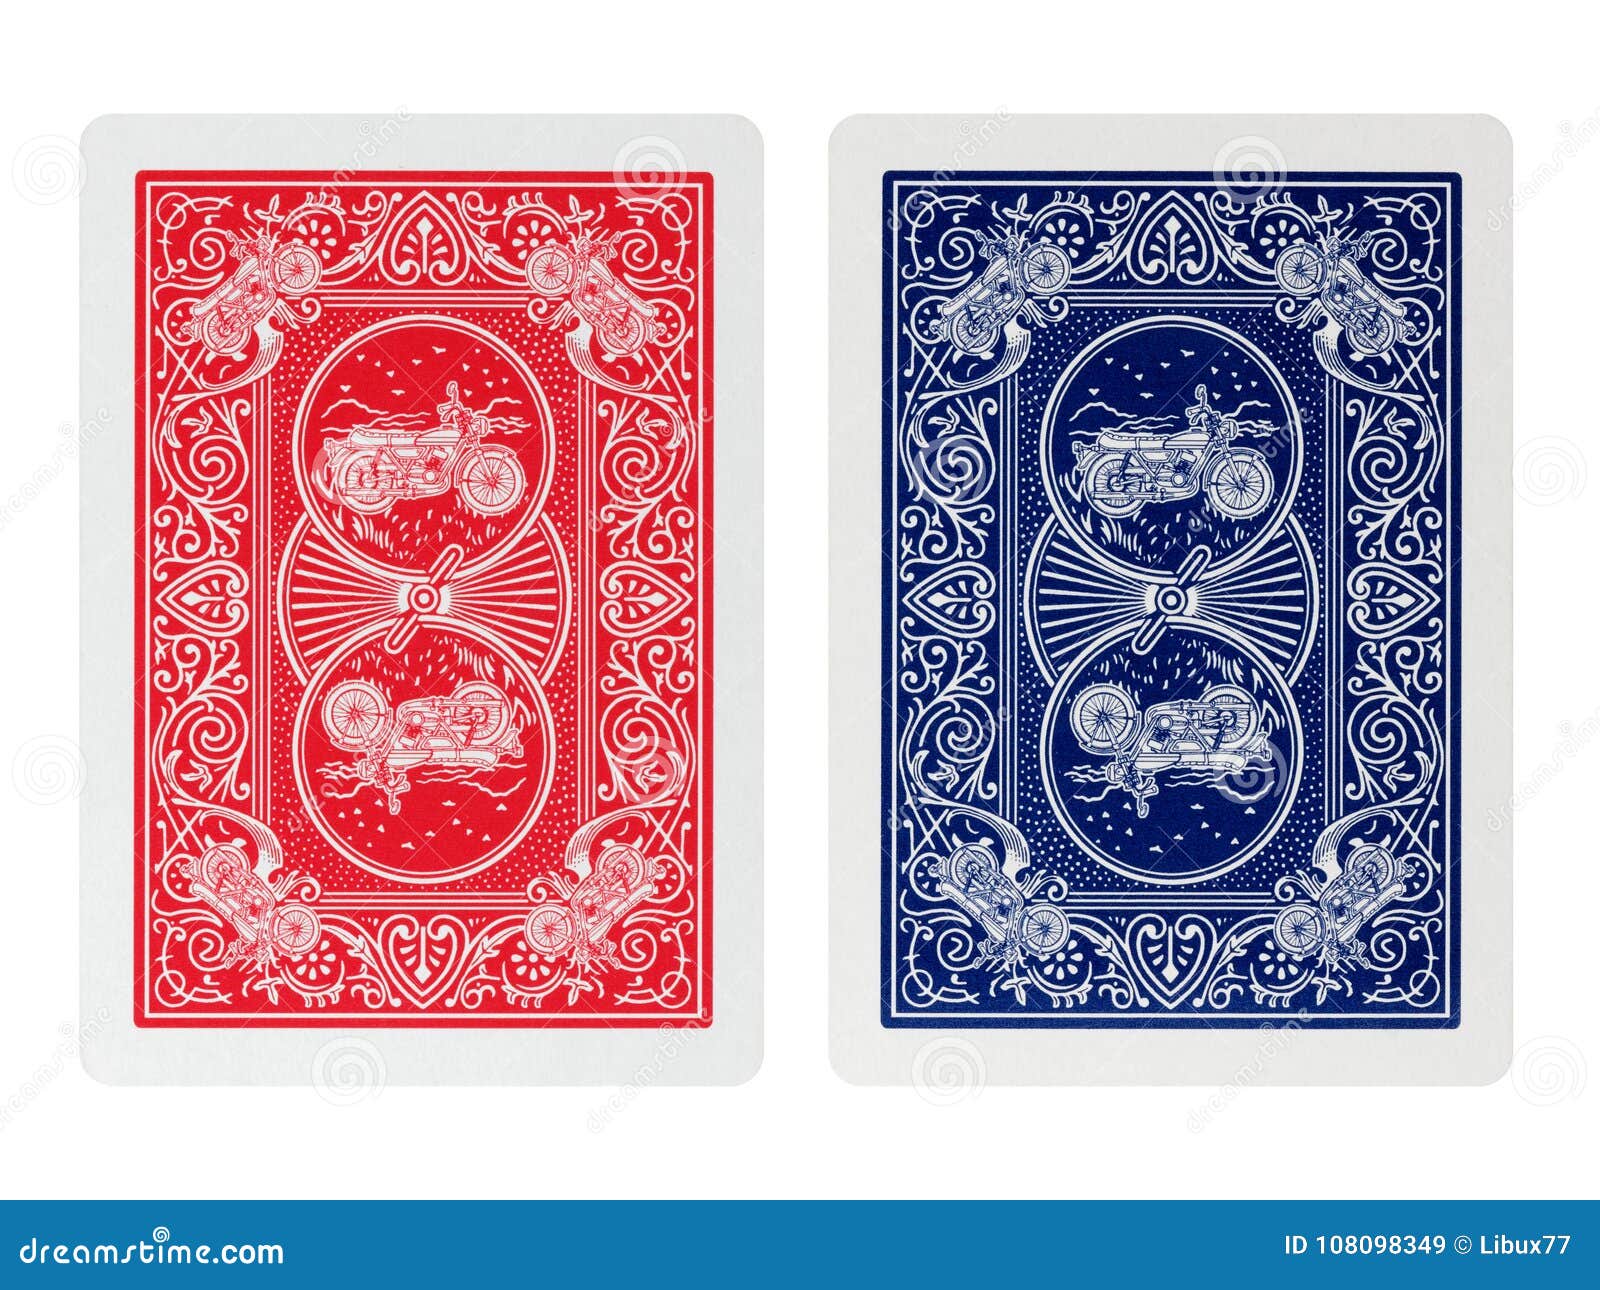 back side poker playing cards 